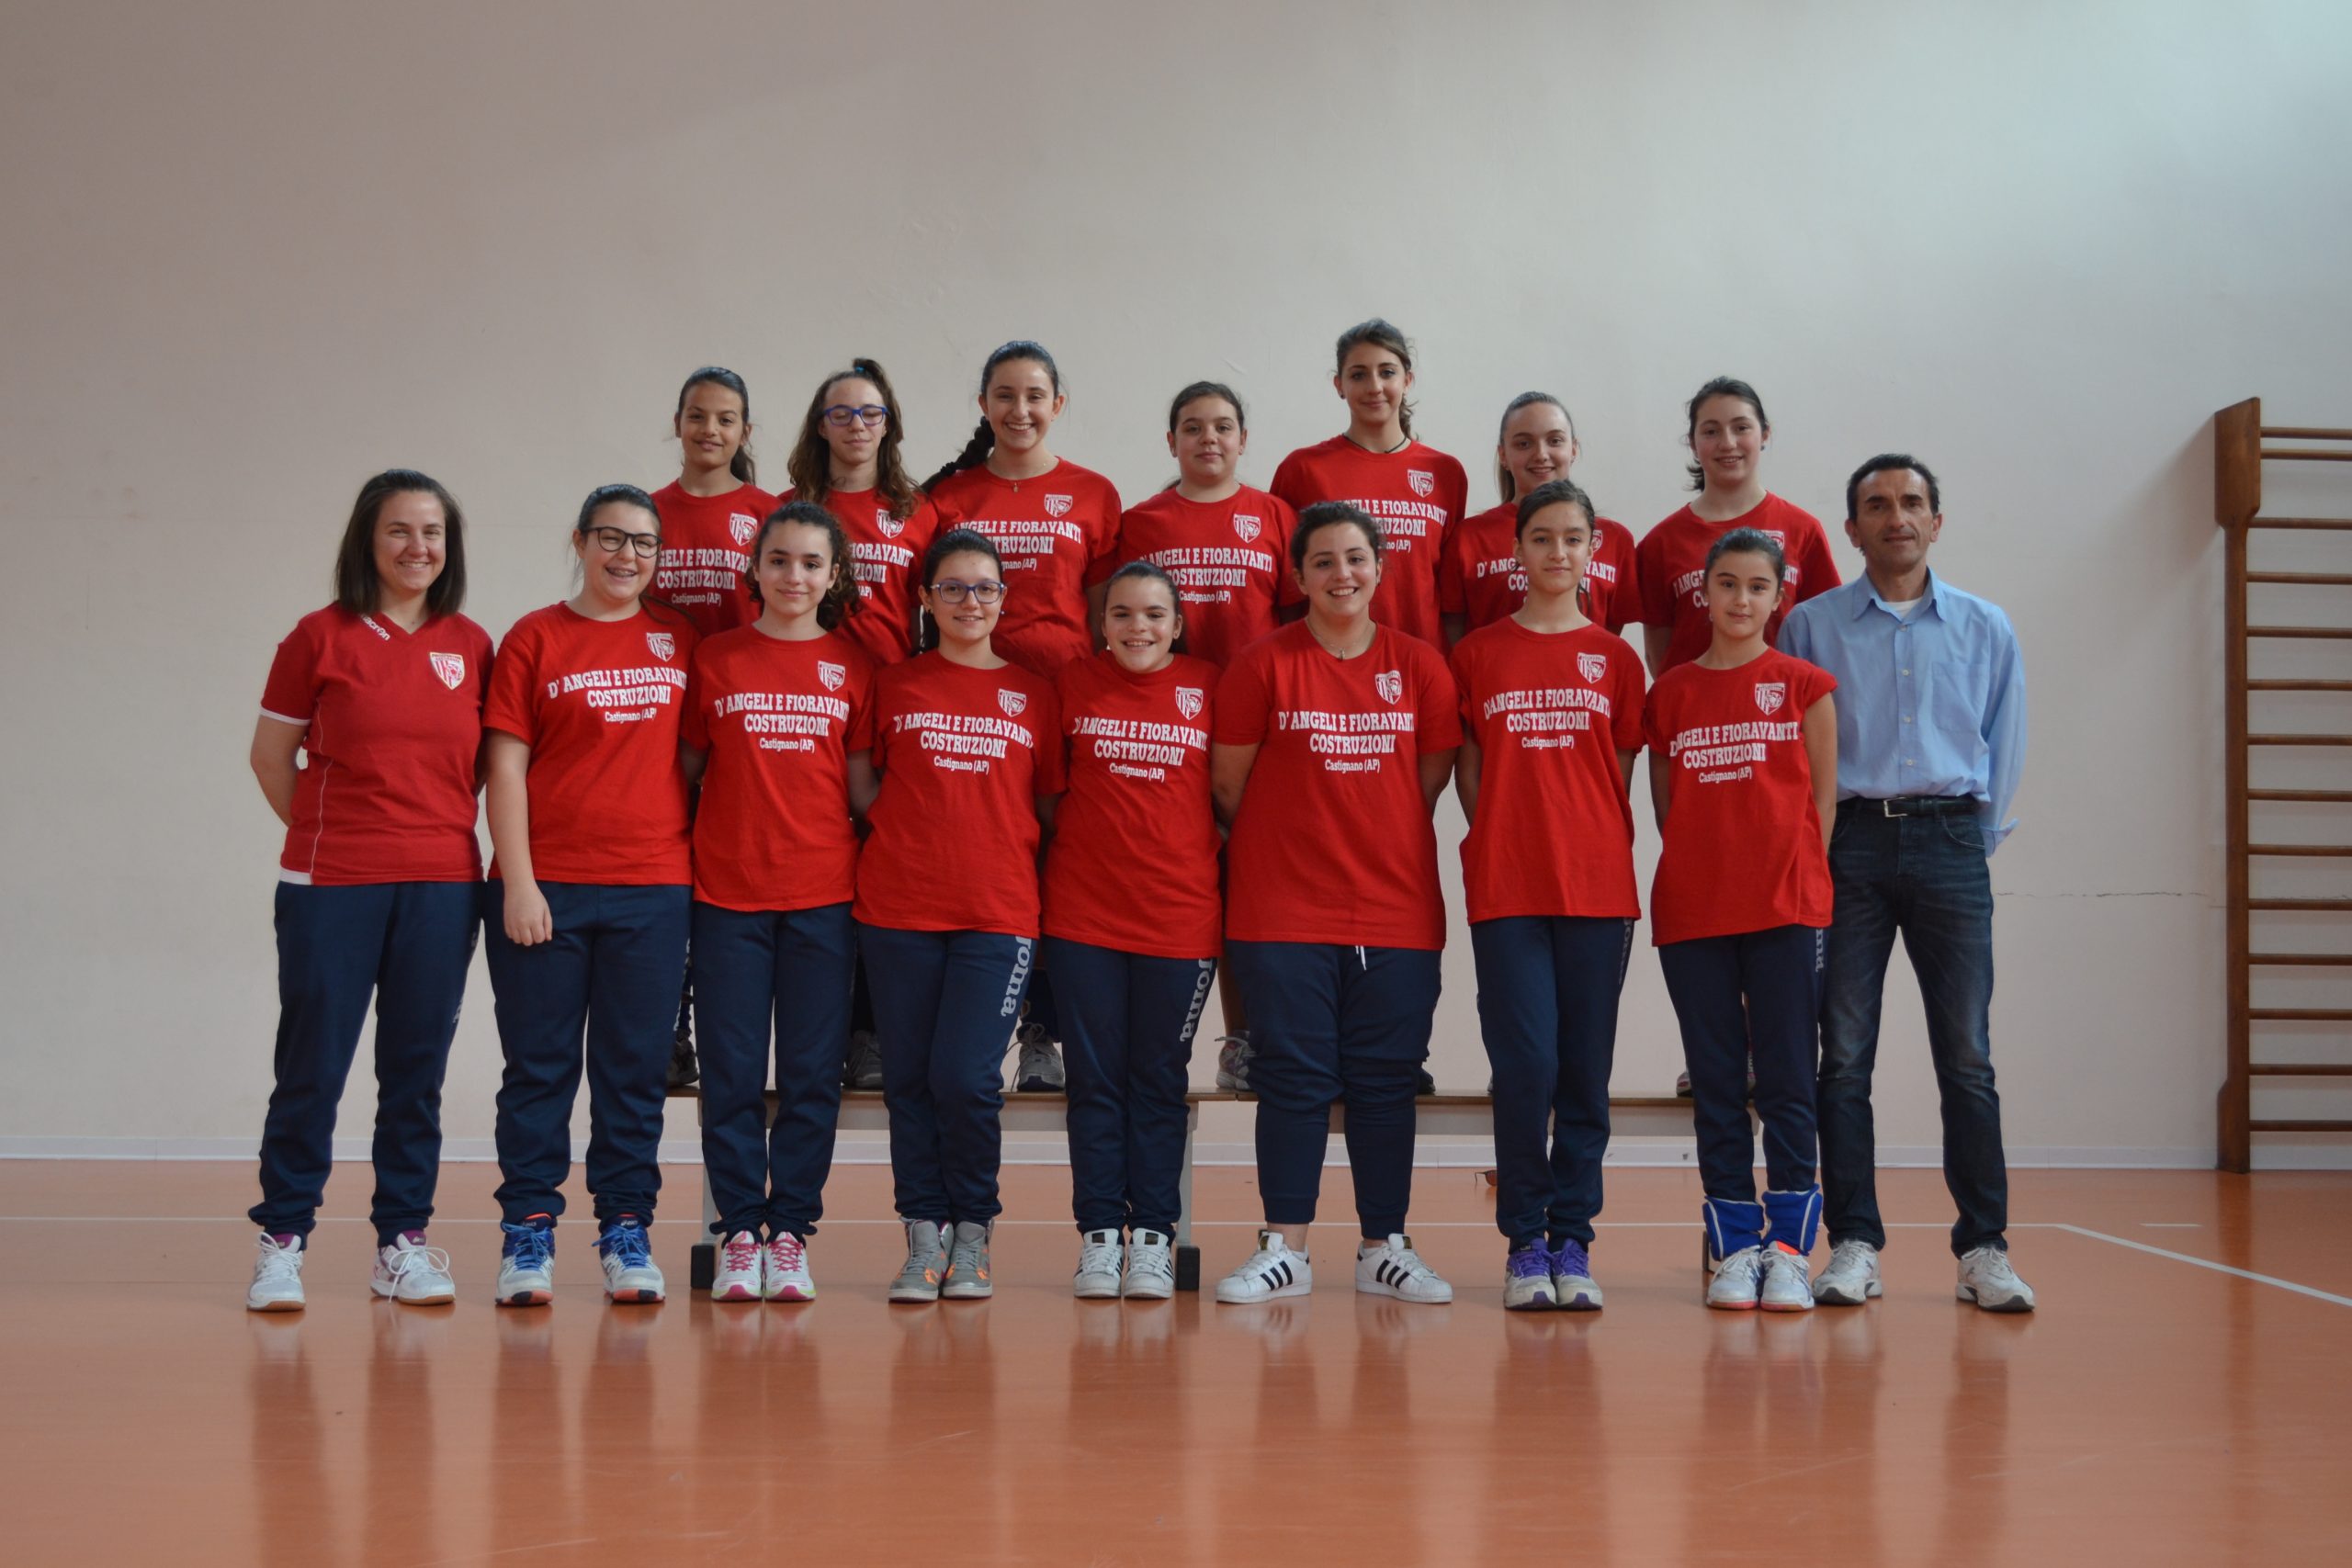 GALLERY VOLLEY – STAGIONE 2015-16